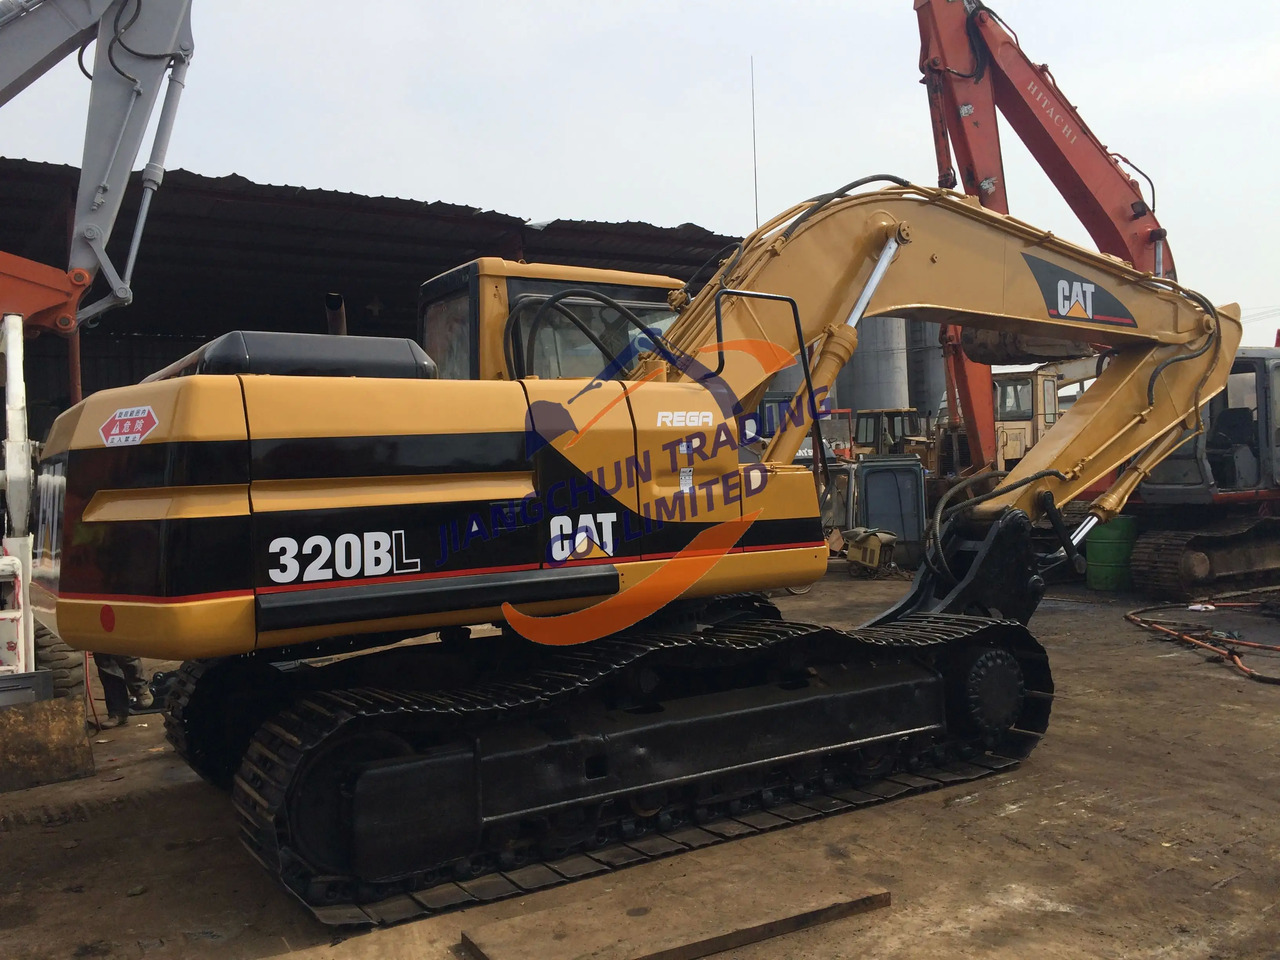 Crawler excavator perfect performance for Used 320BL Hydraulic Crawler Excavator in good condition Suitable For Construction/ Agriculture Digging: picture 3